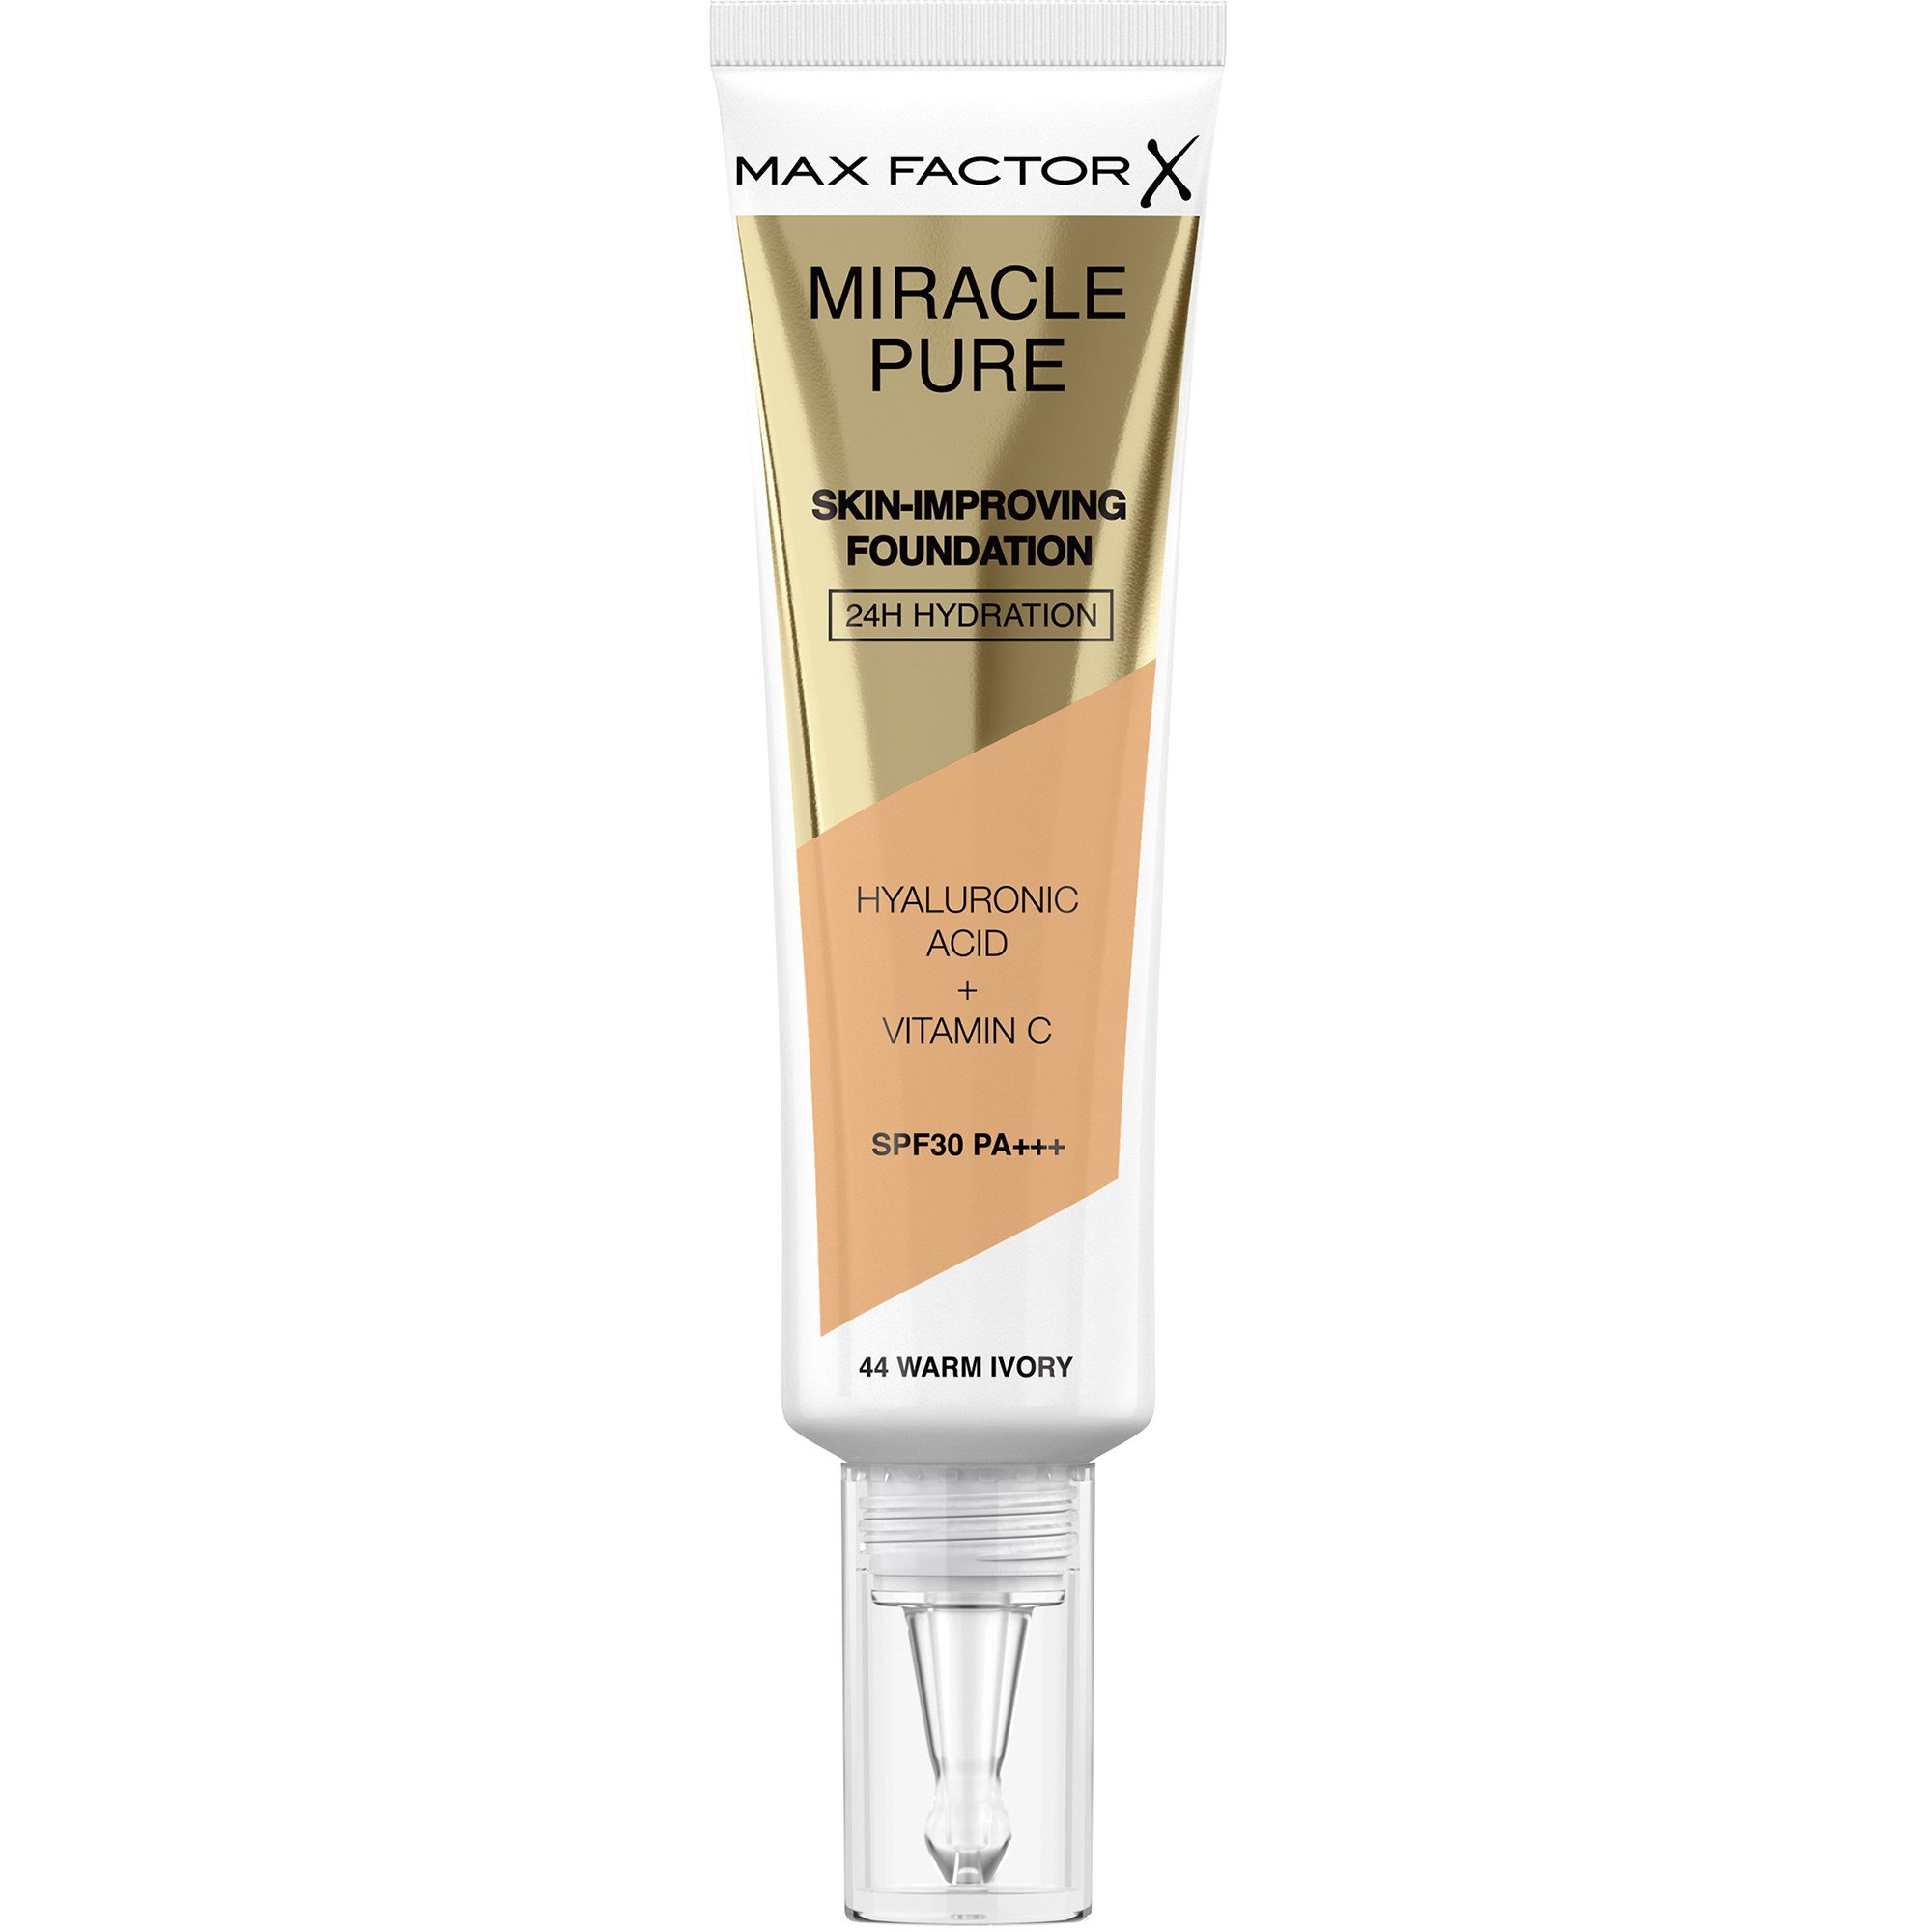 Max Factor Miracle Pure Skin-Improving Foundation 44 Warm Ivory 30ml